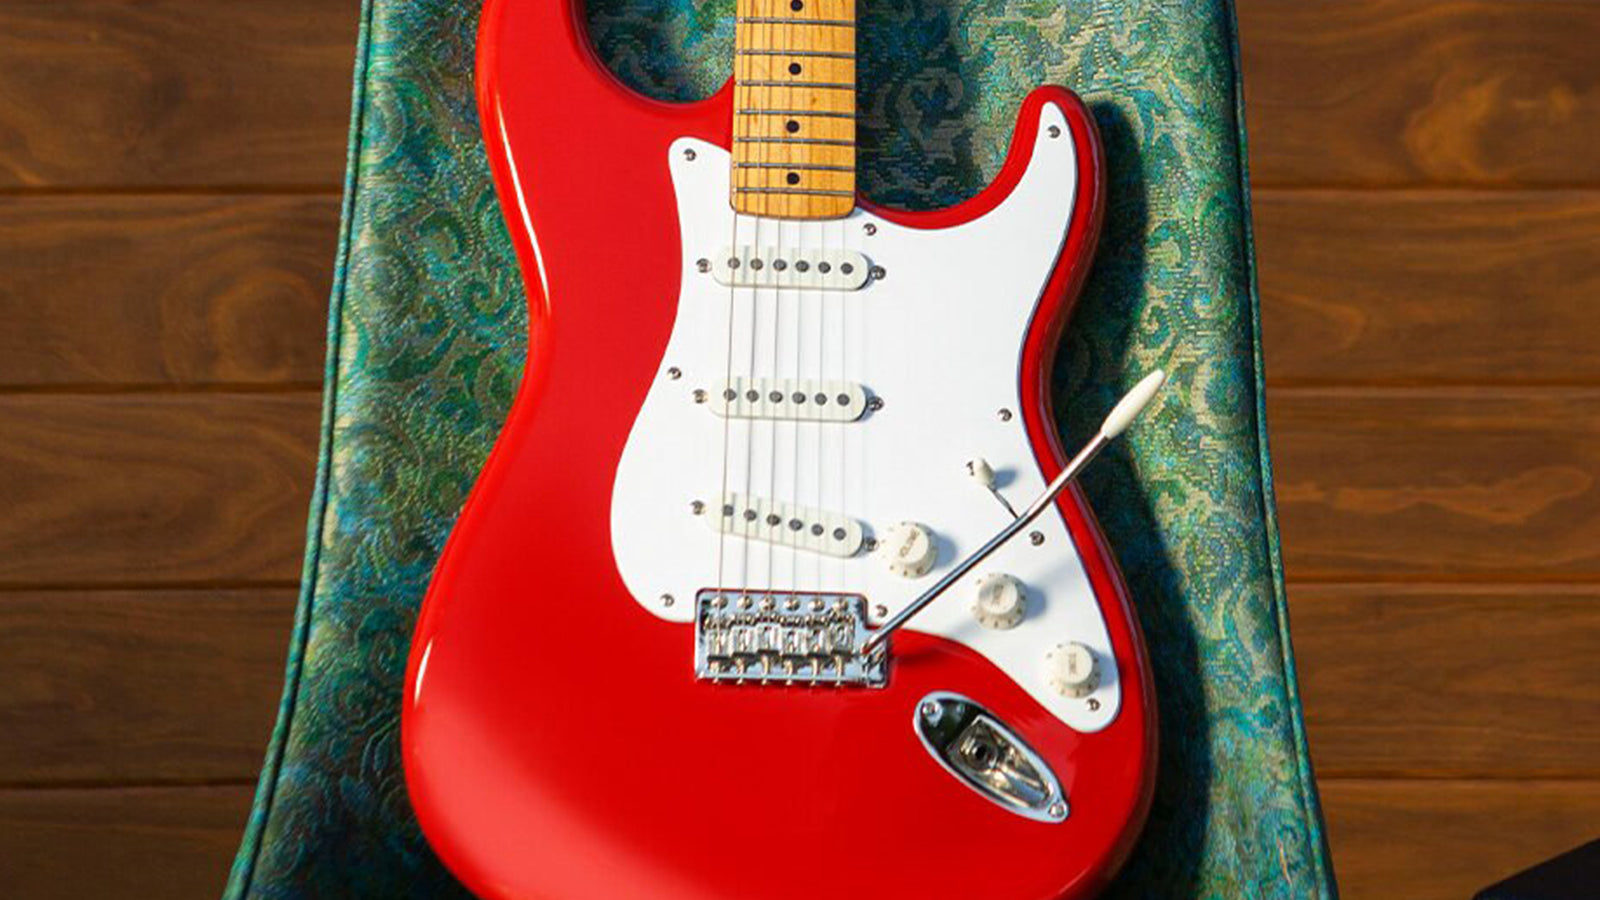 A Squier by Fender Stratocaster resting on a retro looking chair